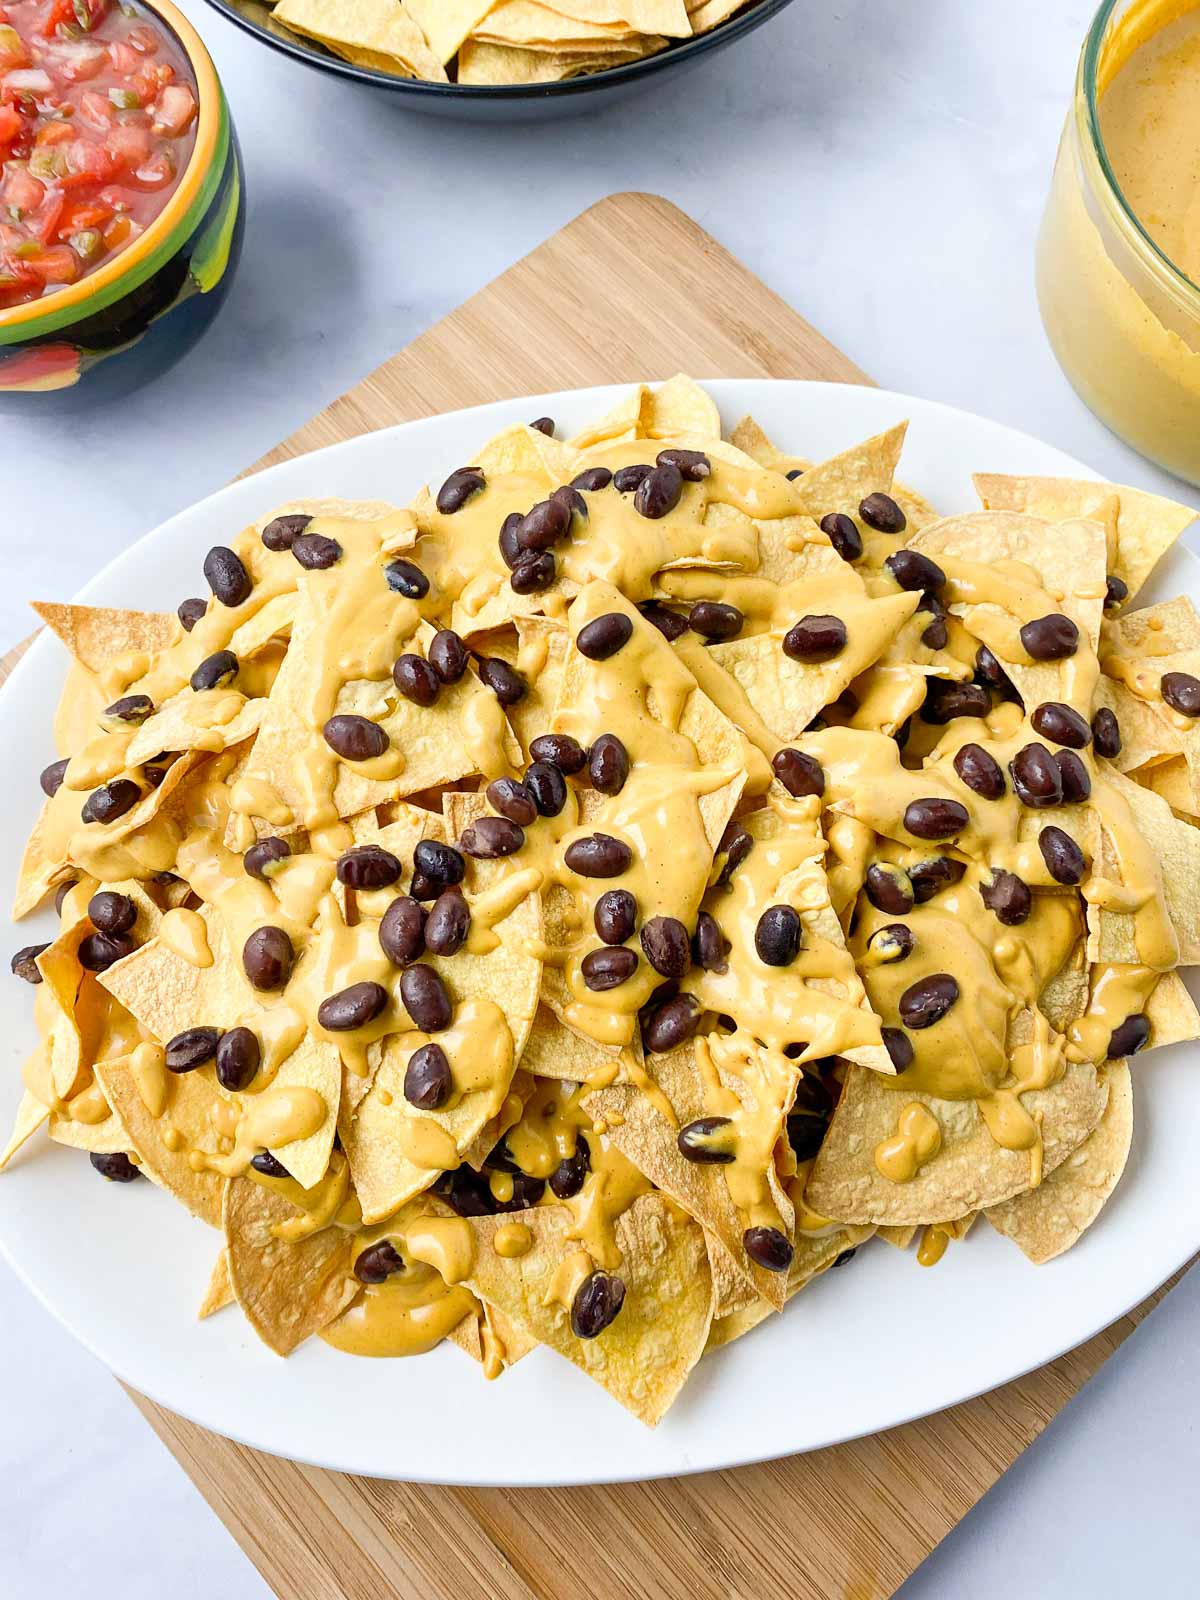 Third layer of tortilla chips, cheese sauce, and black beans on nacho platter.